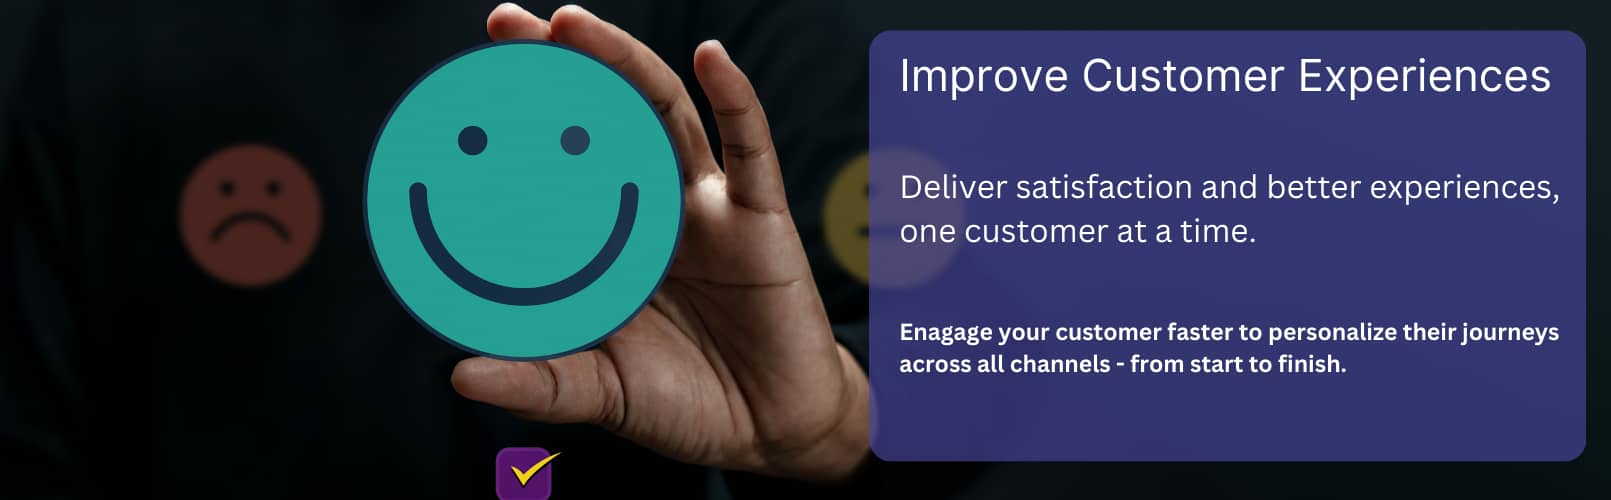 Image showing smiley face. Improve Customer Experiences.